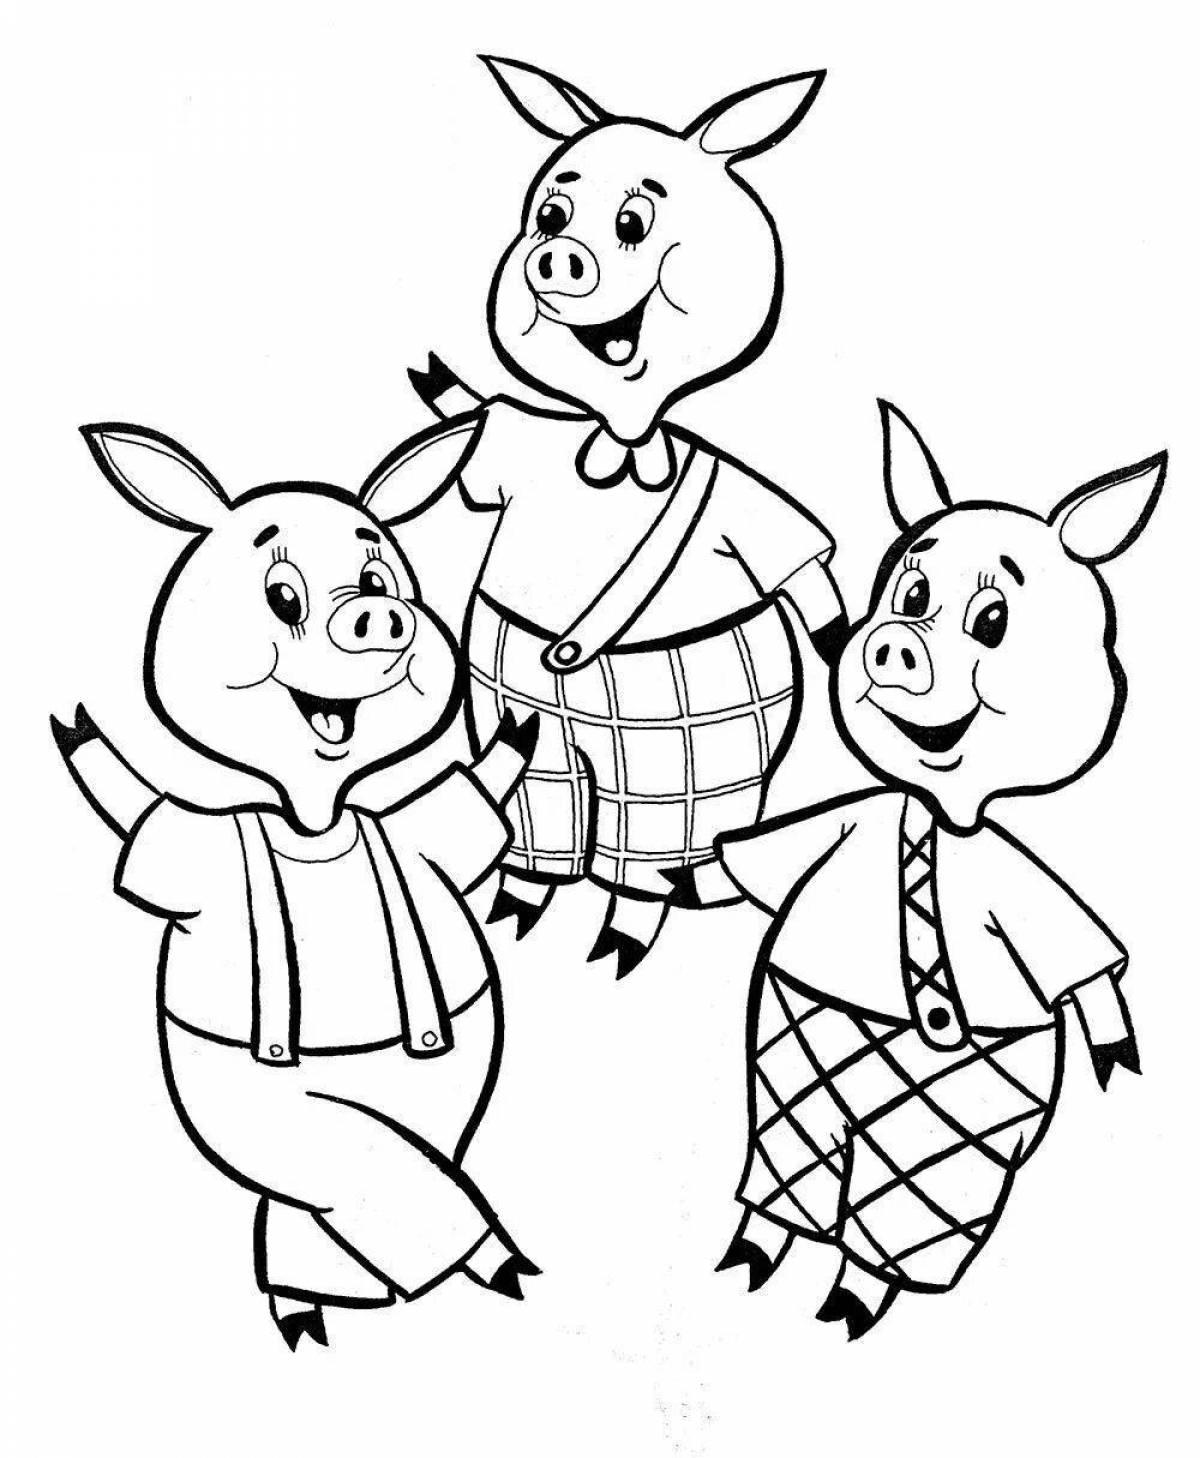 Three little pigs coloring book for kids